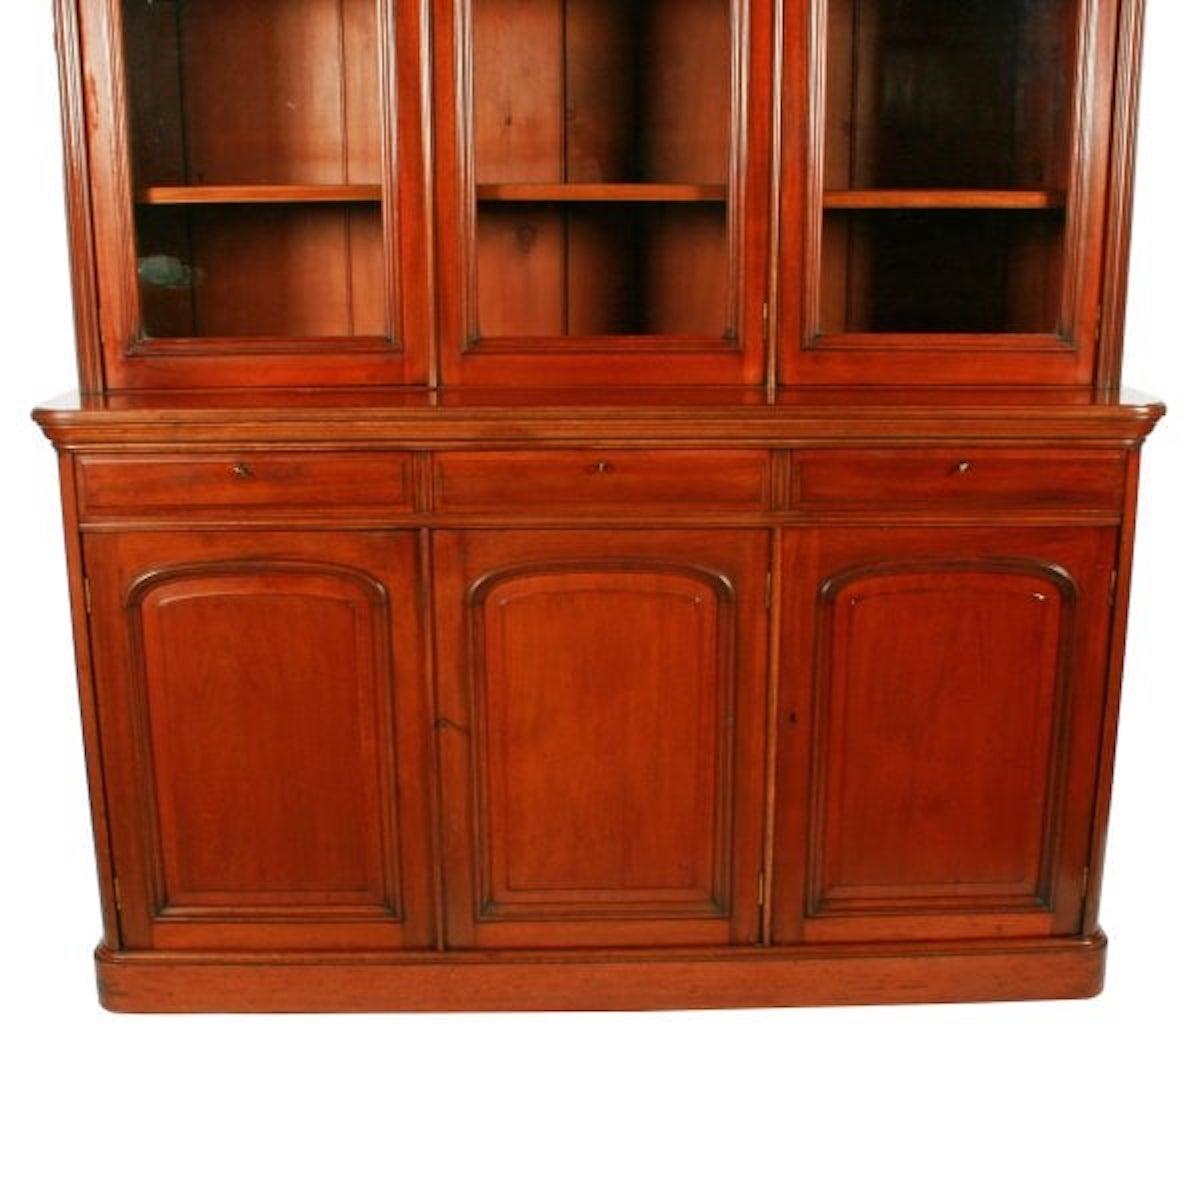 Victorian Three Door Bookcase, 19th Century In Excellent Condition For Sale In Southall, GB